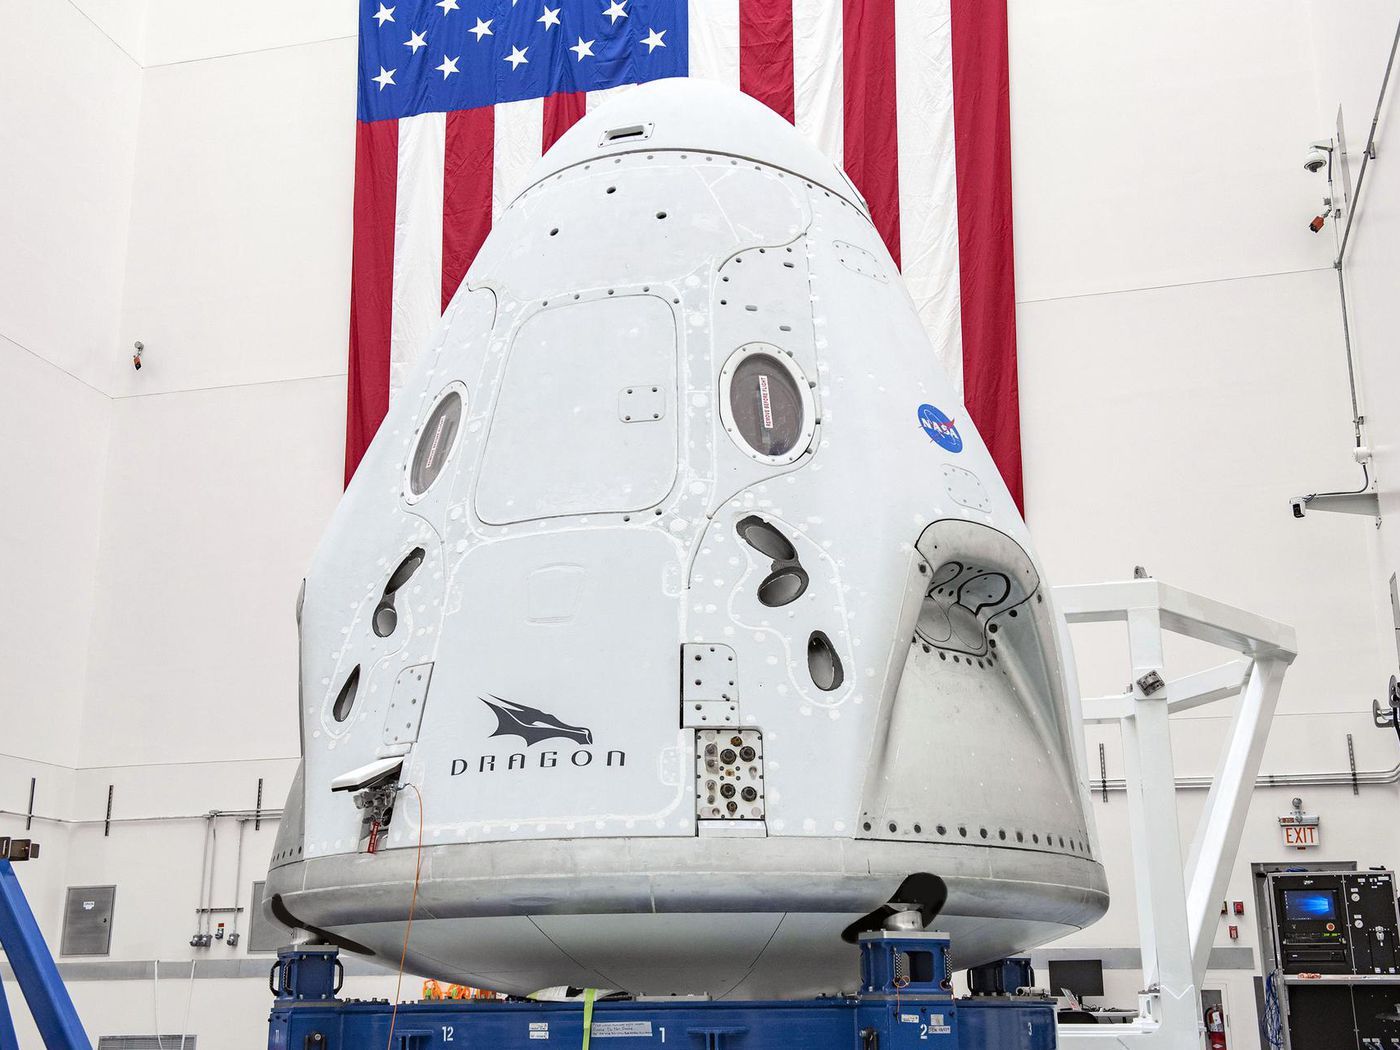 NASA sets date for SpaceX's first passenger flight on Crew Dragon